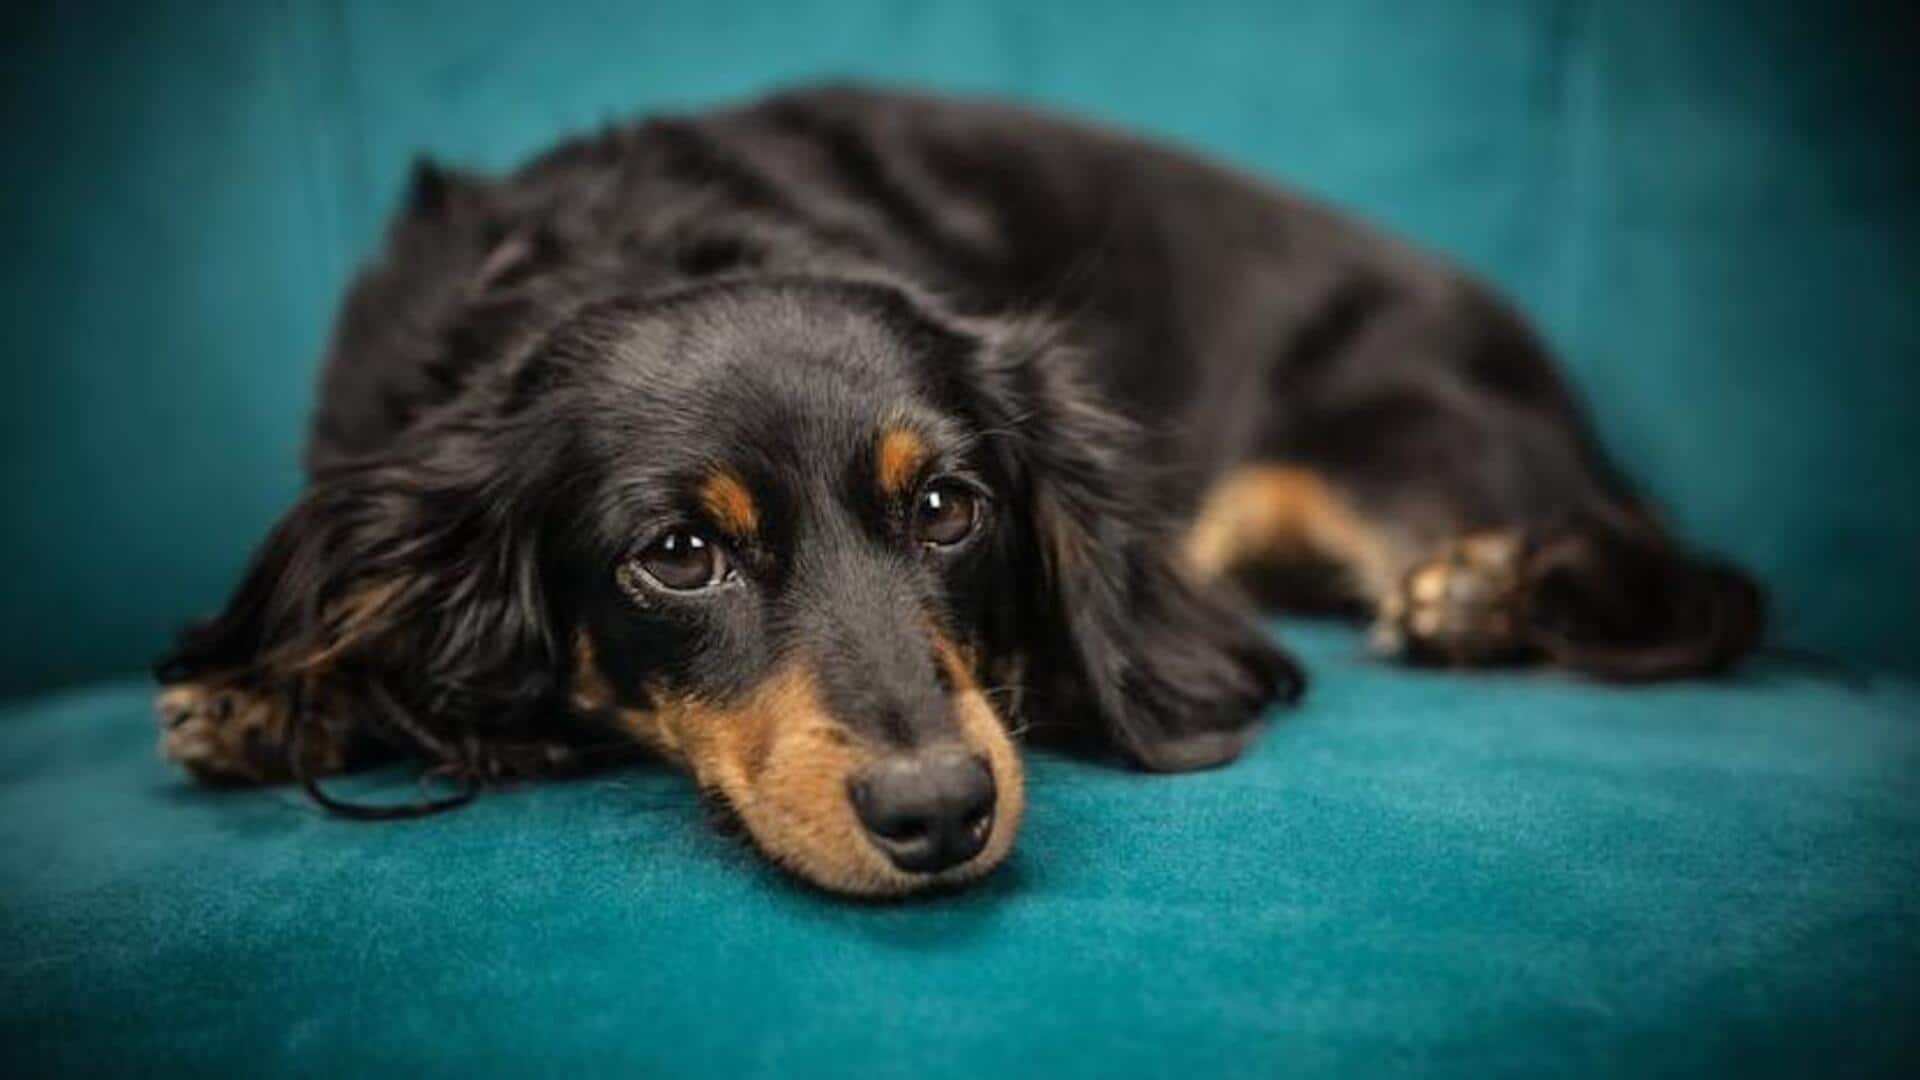 Dachshund back care: Tips for preventing pain issues